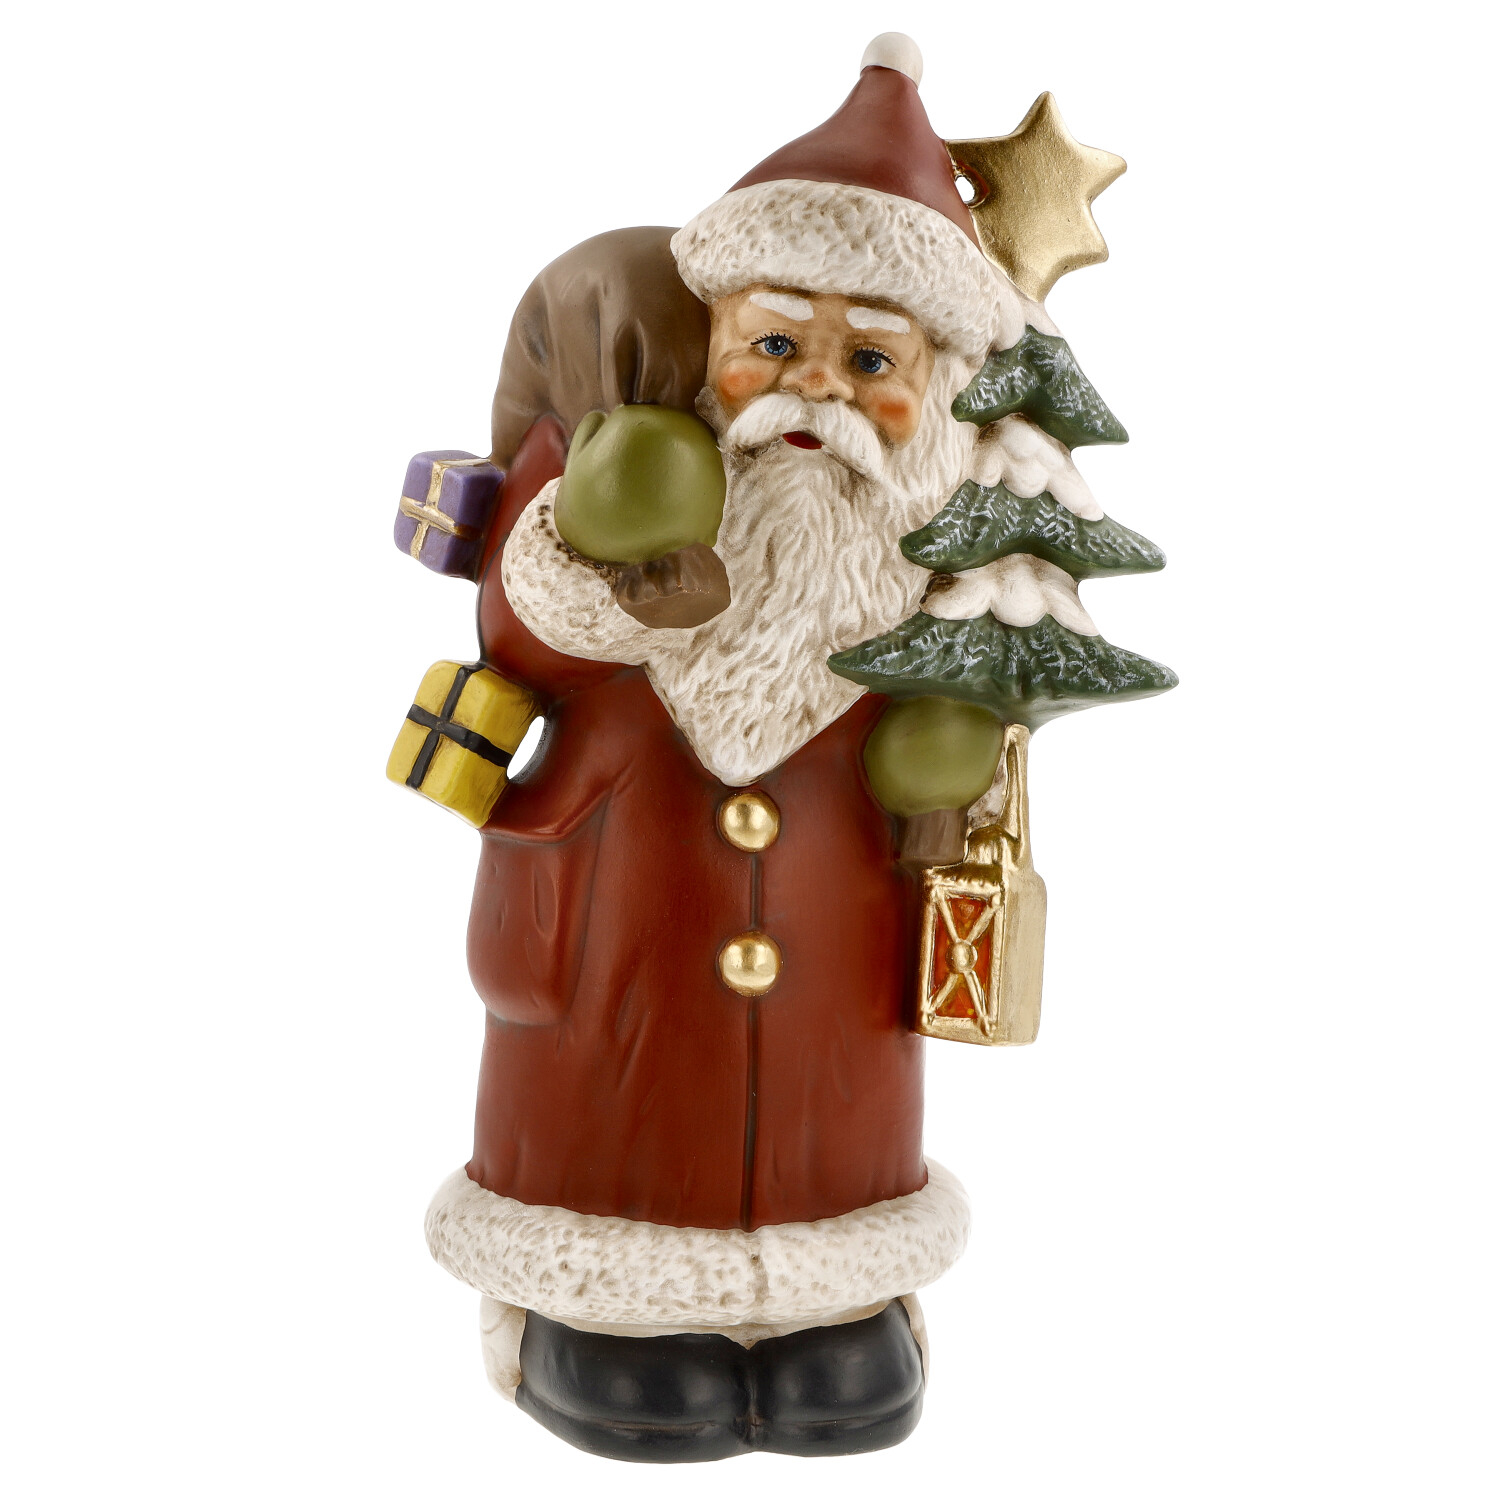 Santa Claus with tree and star - Marolin papermaché - made in Germany